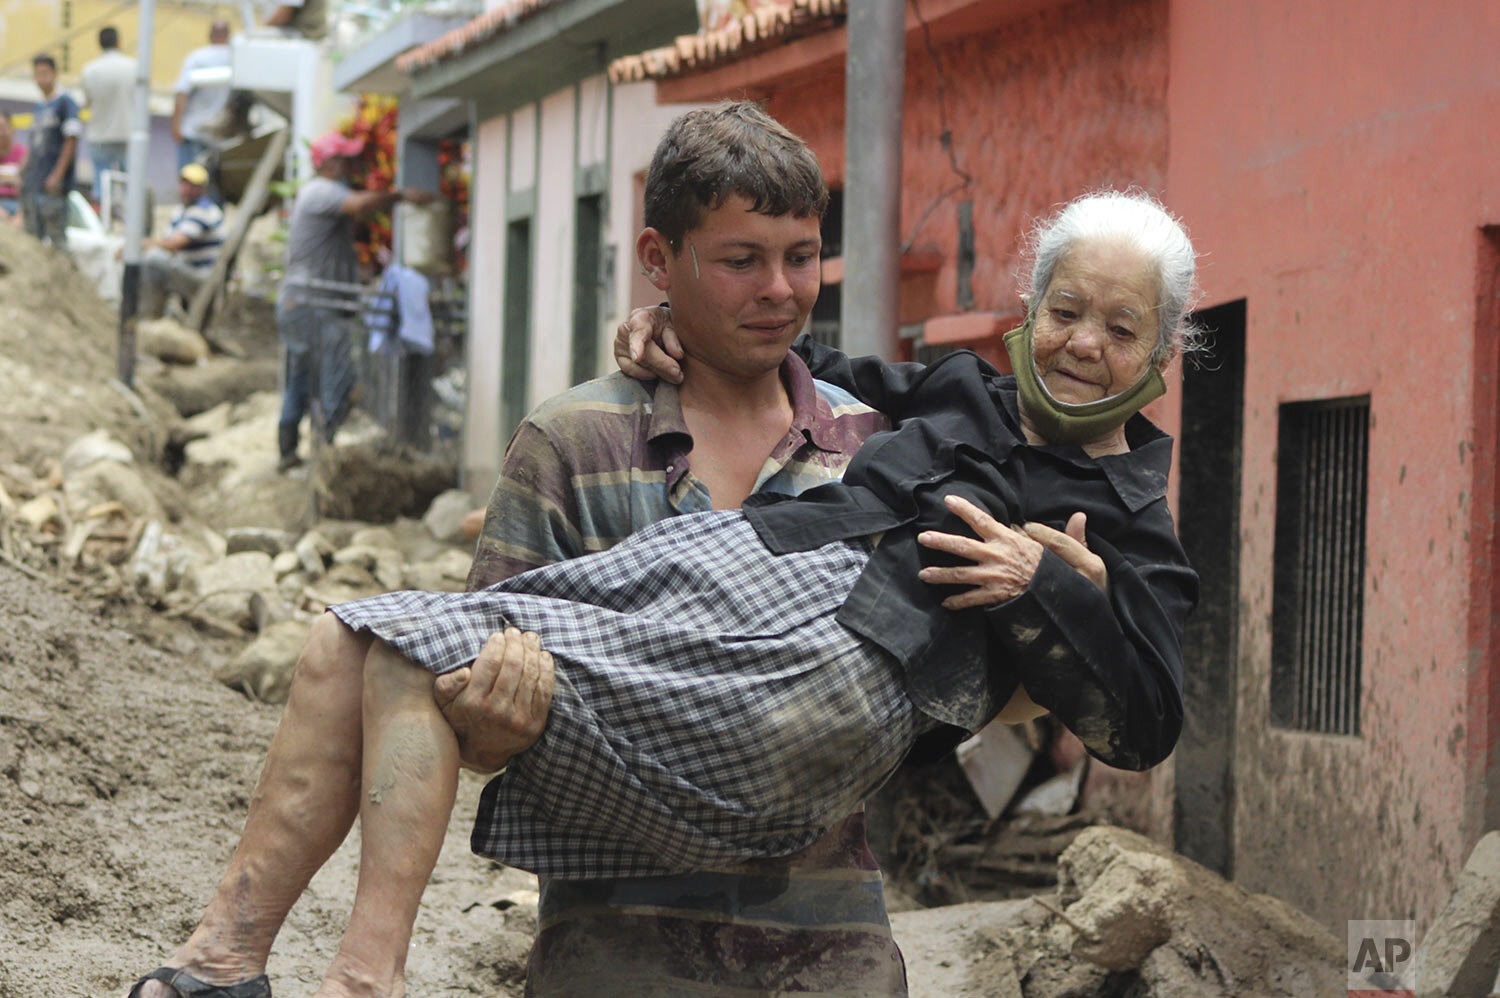  A man carries an elderly woman across a street damaged by flooding and landslides triggered by torrential rains in Tovar municipality in Merida state,Venezuela, Aug. 26, 2021. (AP Photo/Luis Bustos) 